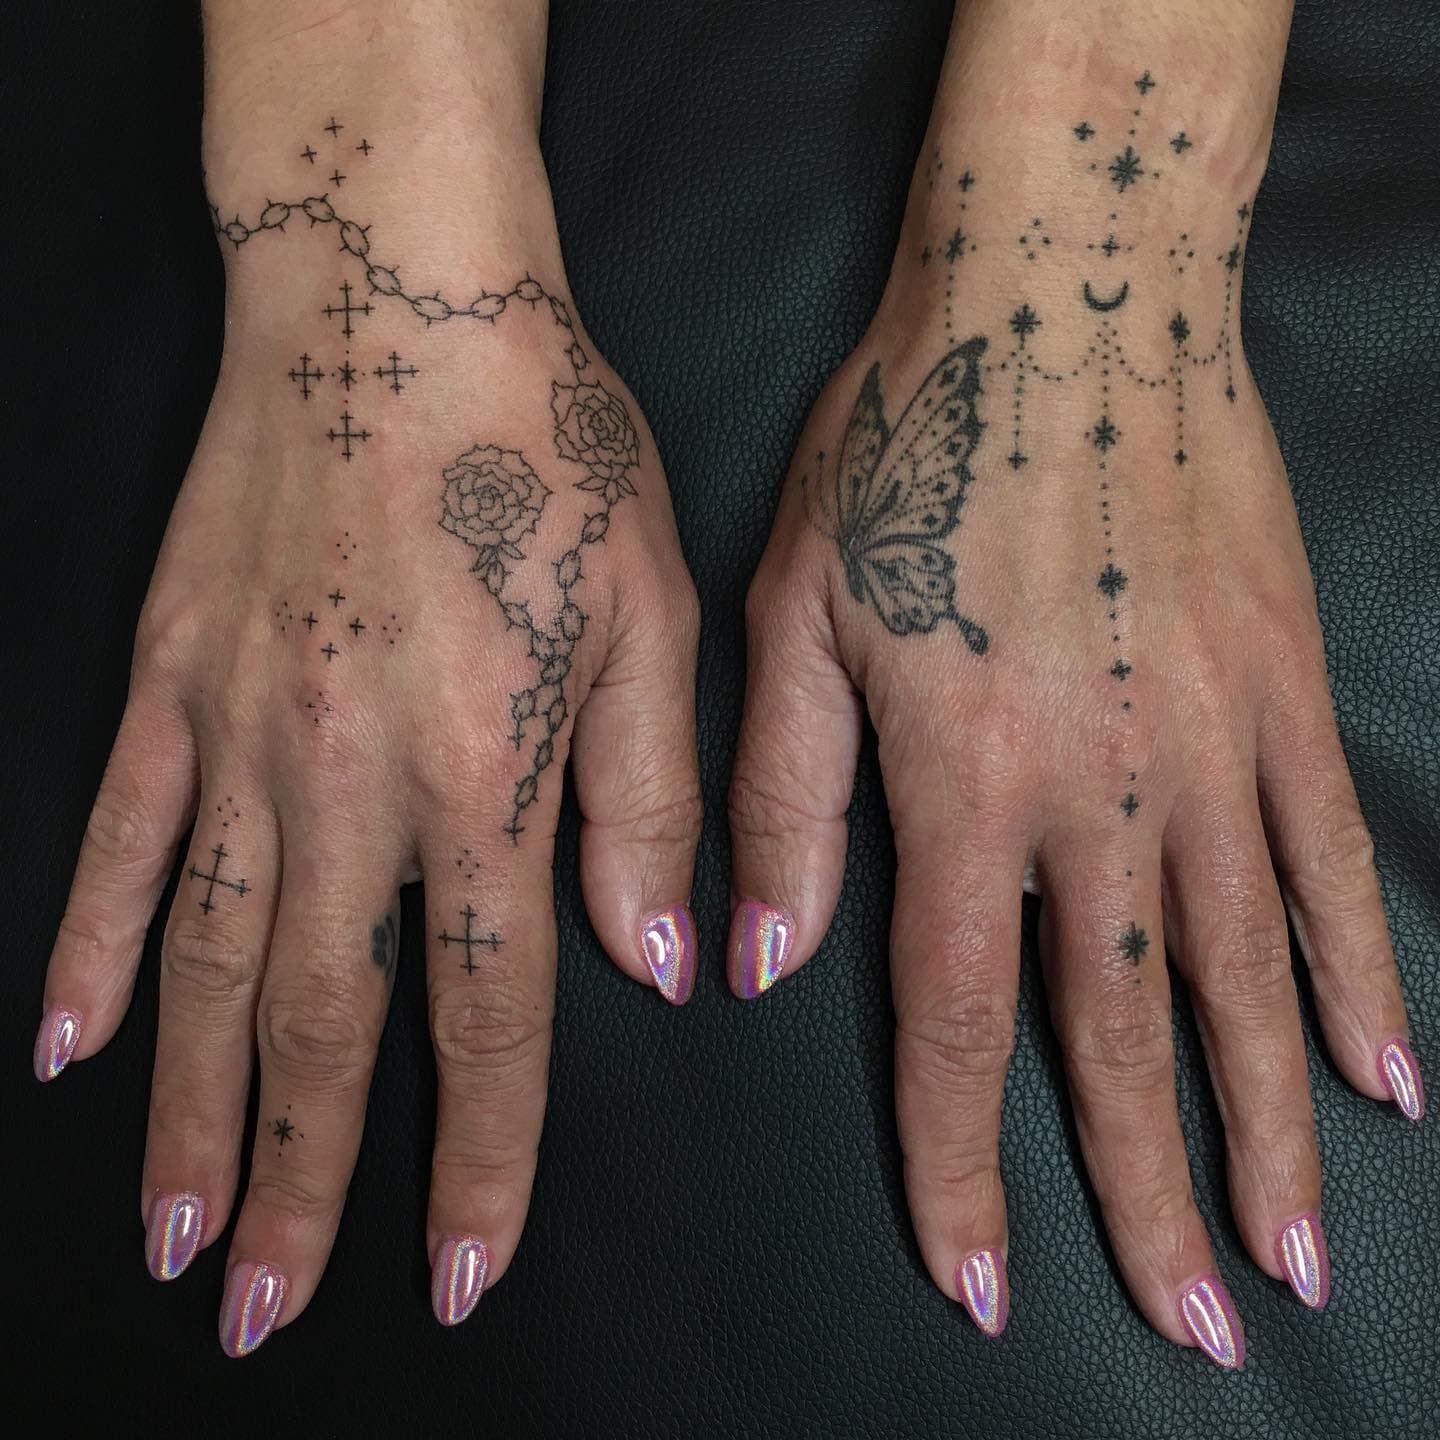 5 Stick n Poke Tattoos Thatll Make You Look Totally Oh God What Have I  Done